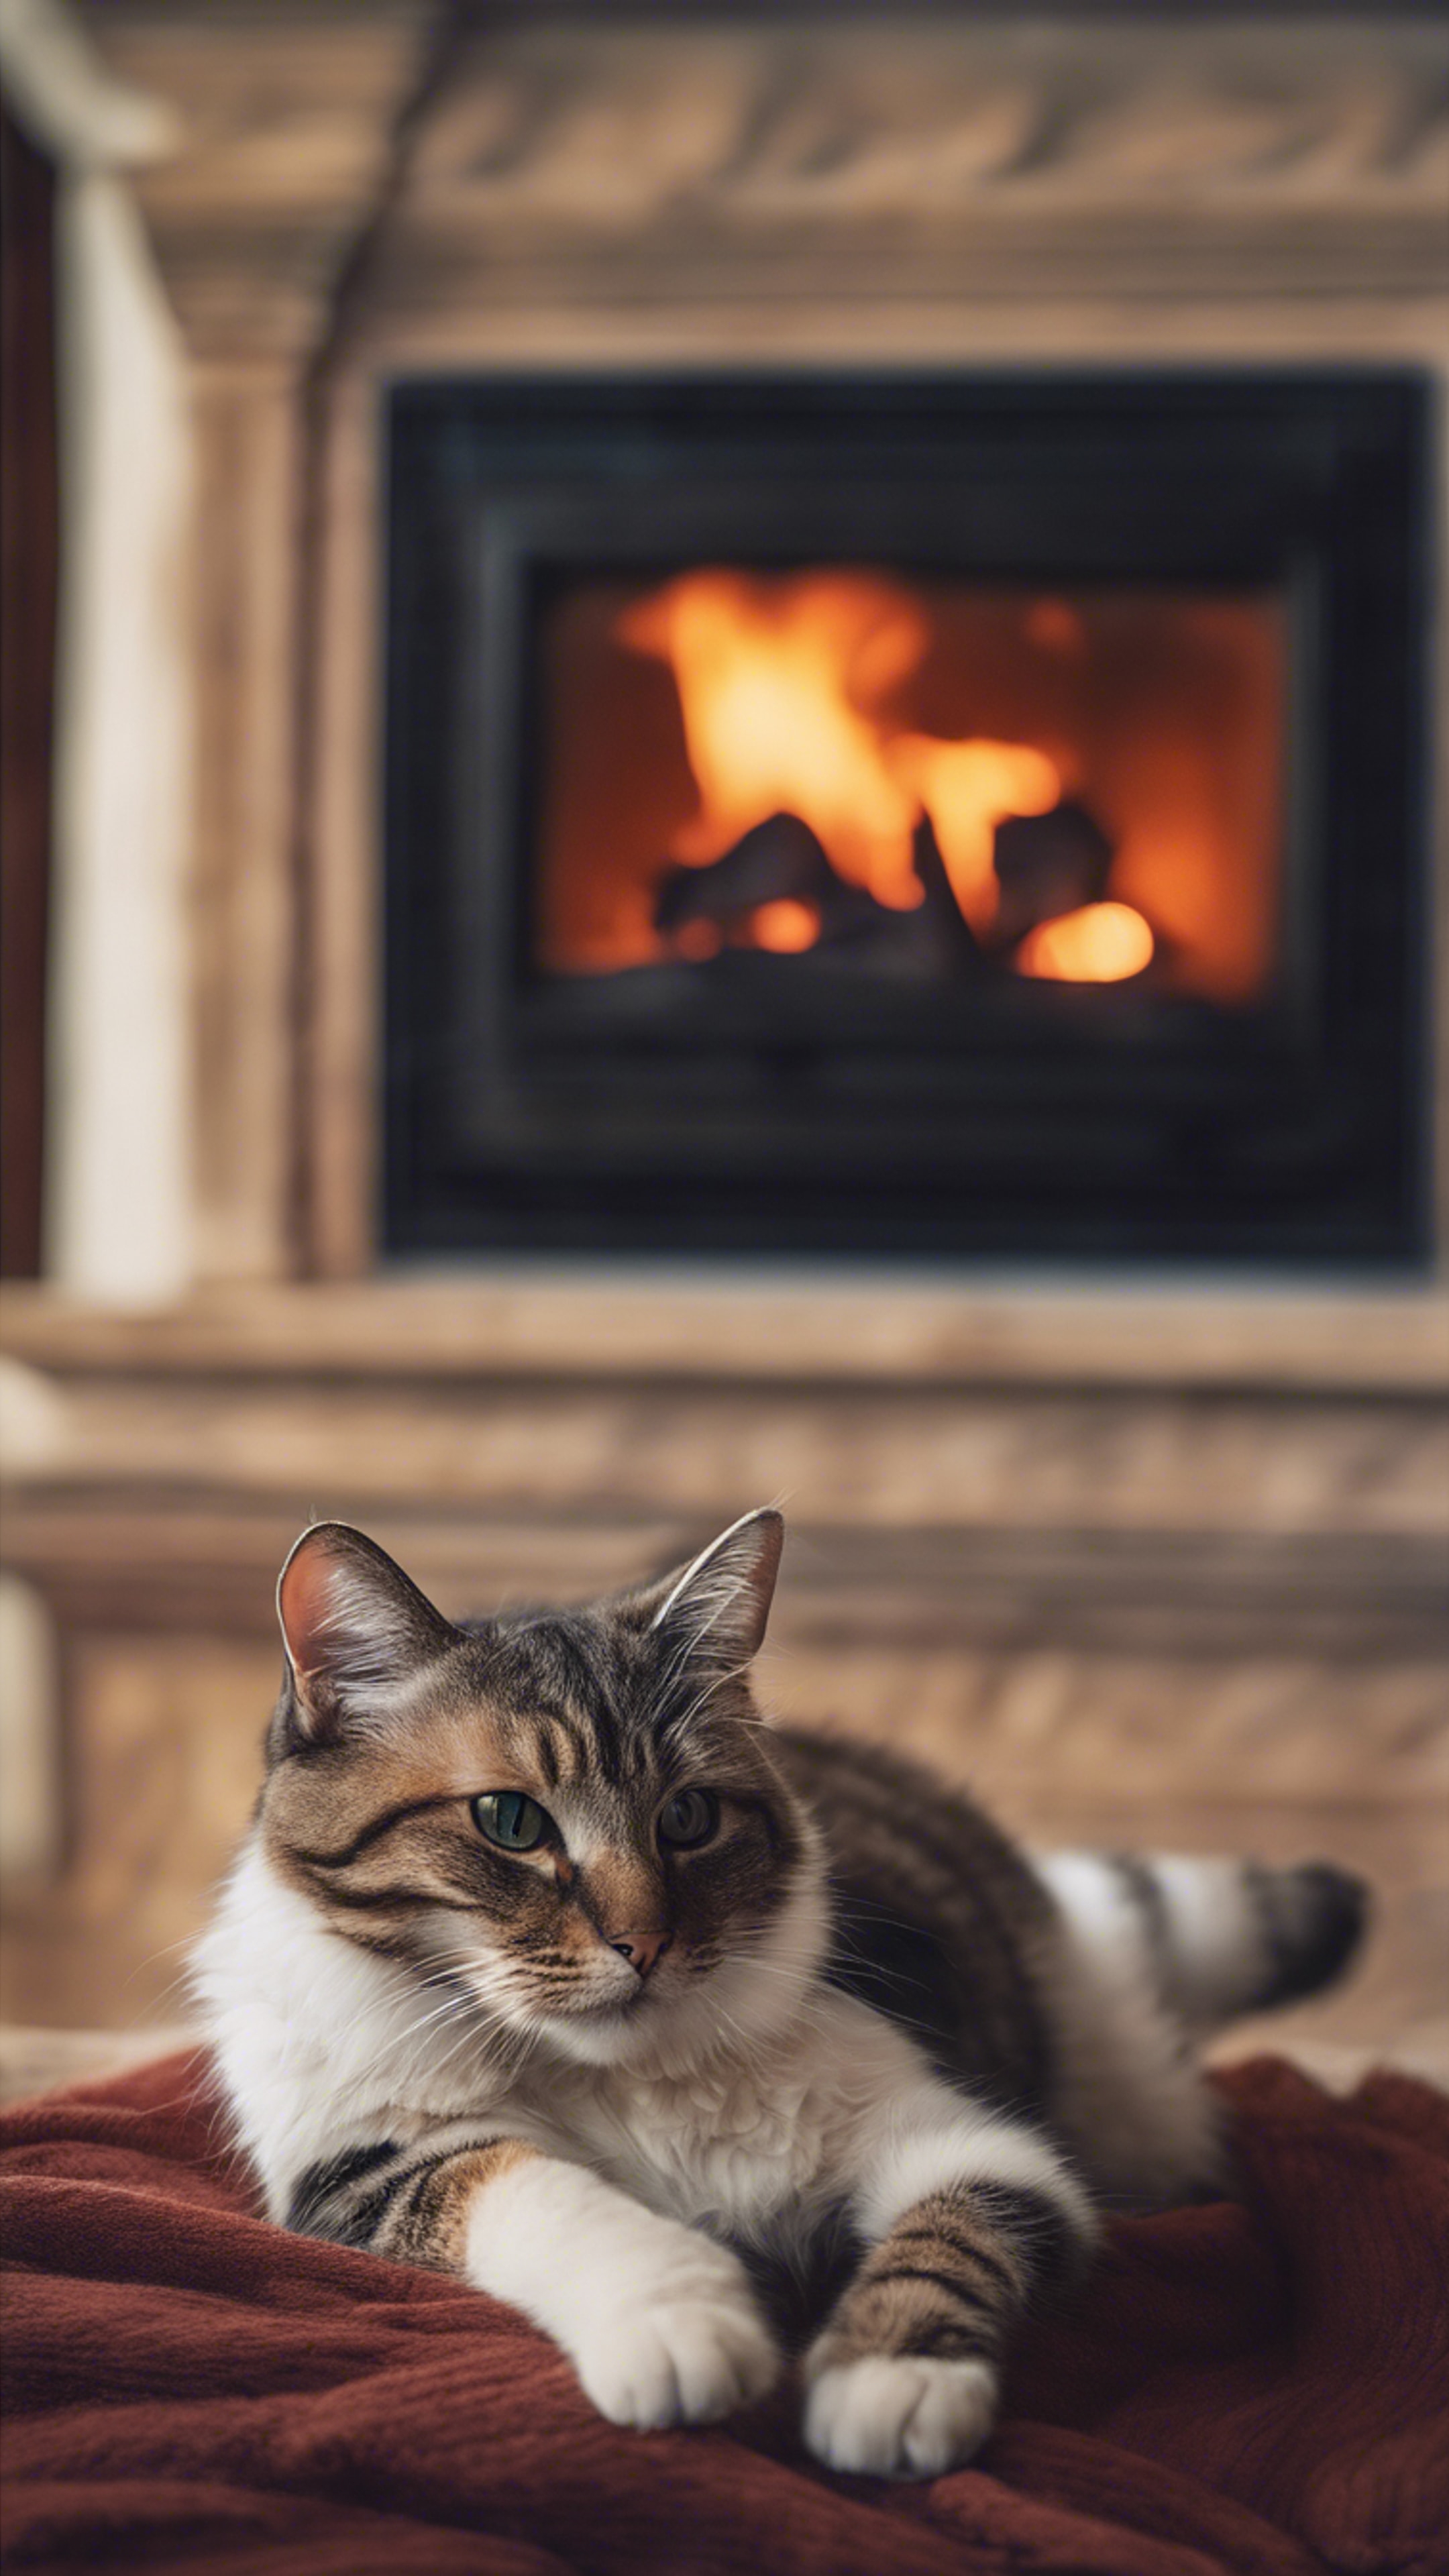 A cat lounging in front of a roaring fireplace, completely mesmerized by the flickering flames. Sfondo[f30d5ca7e04c497dade0]